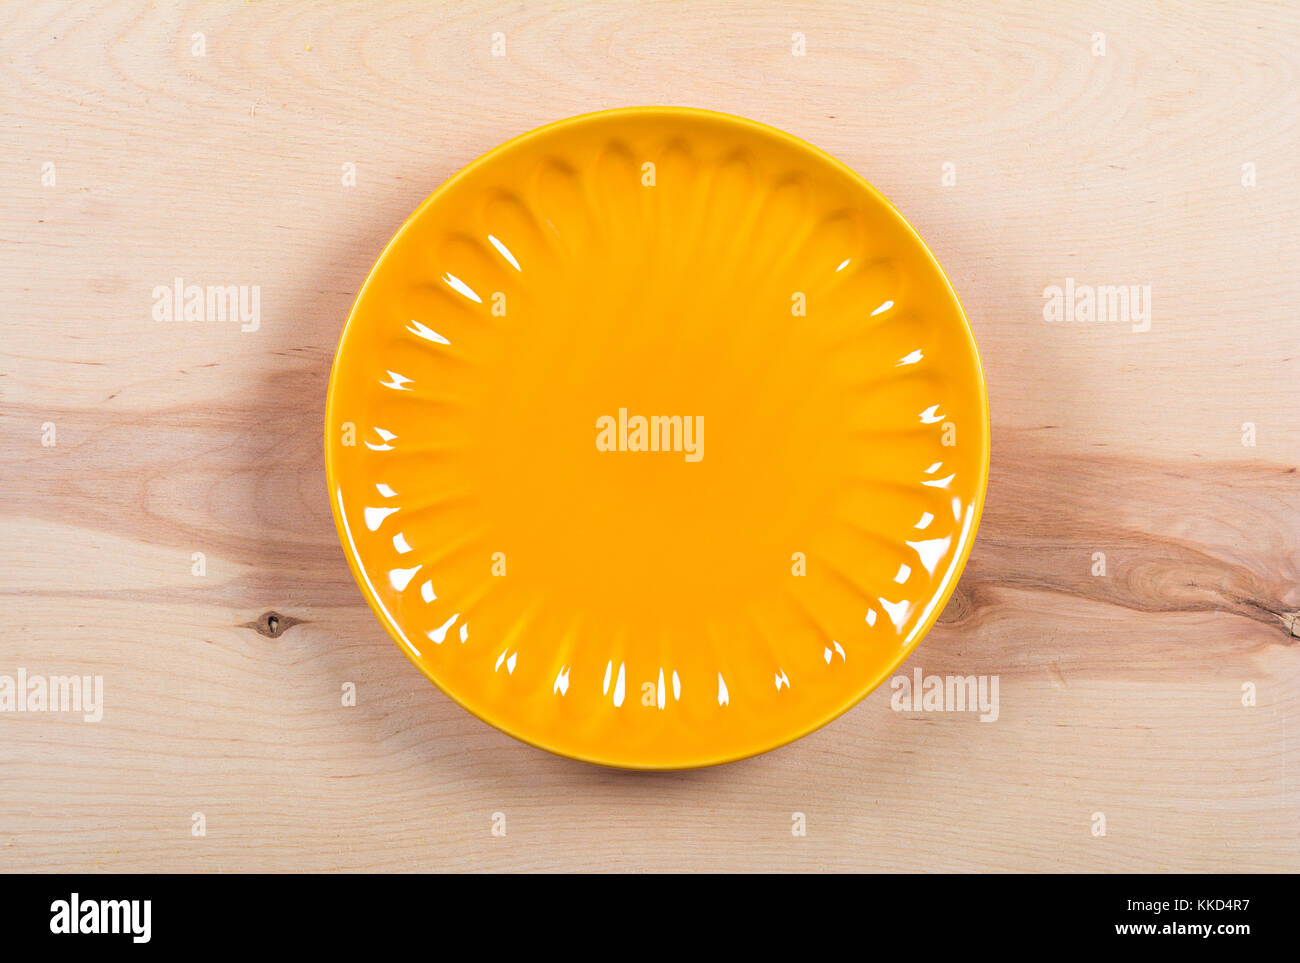 Empty porcelain plate on wooden background Stock Photo